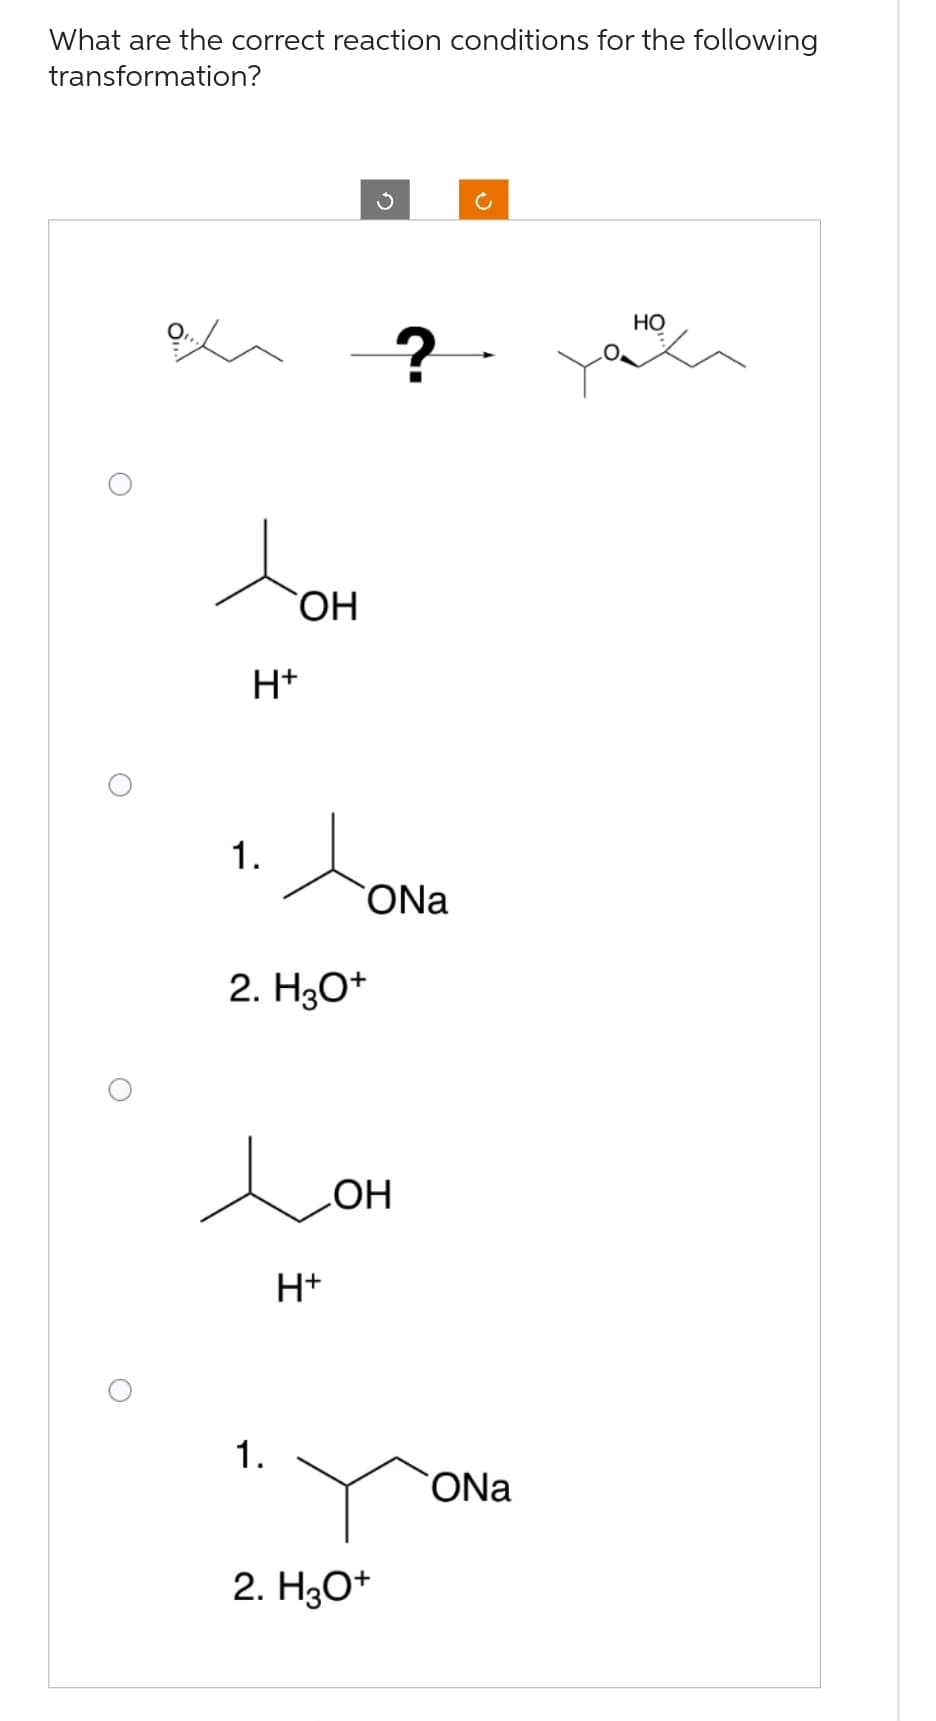 What are the correct reaction conditions for the following
transformation?
O
O
H+
1.
OH
2. H3O+
e
H+
1.
ONa
?
OH
2. H3O+
ONa
HO